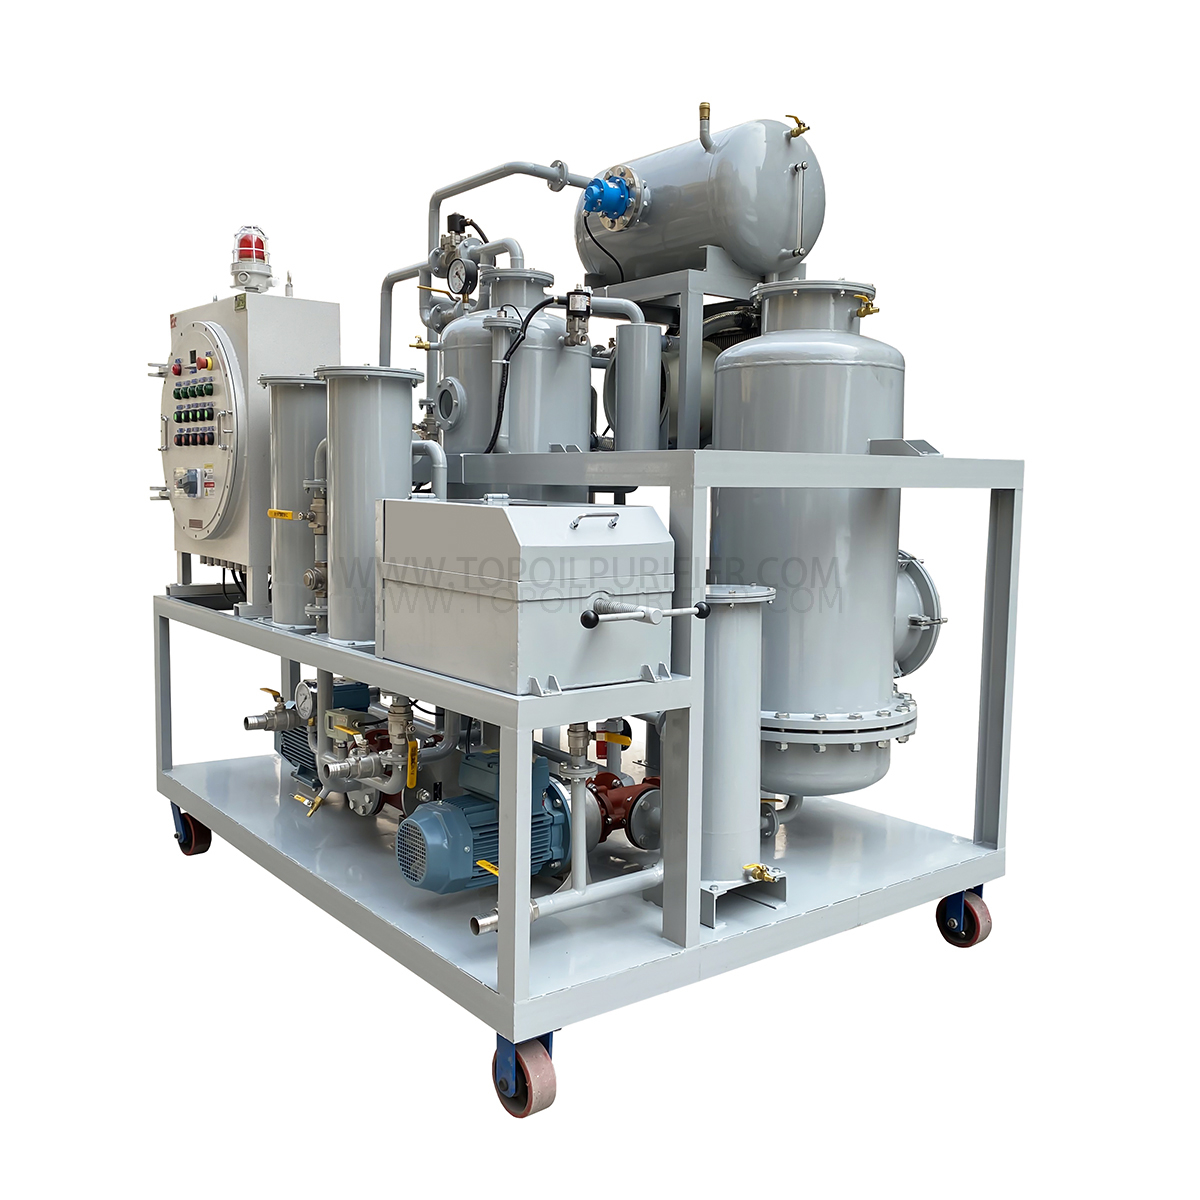 TYR-Ex Diesel Fuel Oil Purification and Discolorization Machine